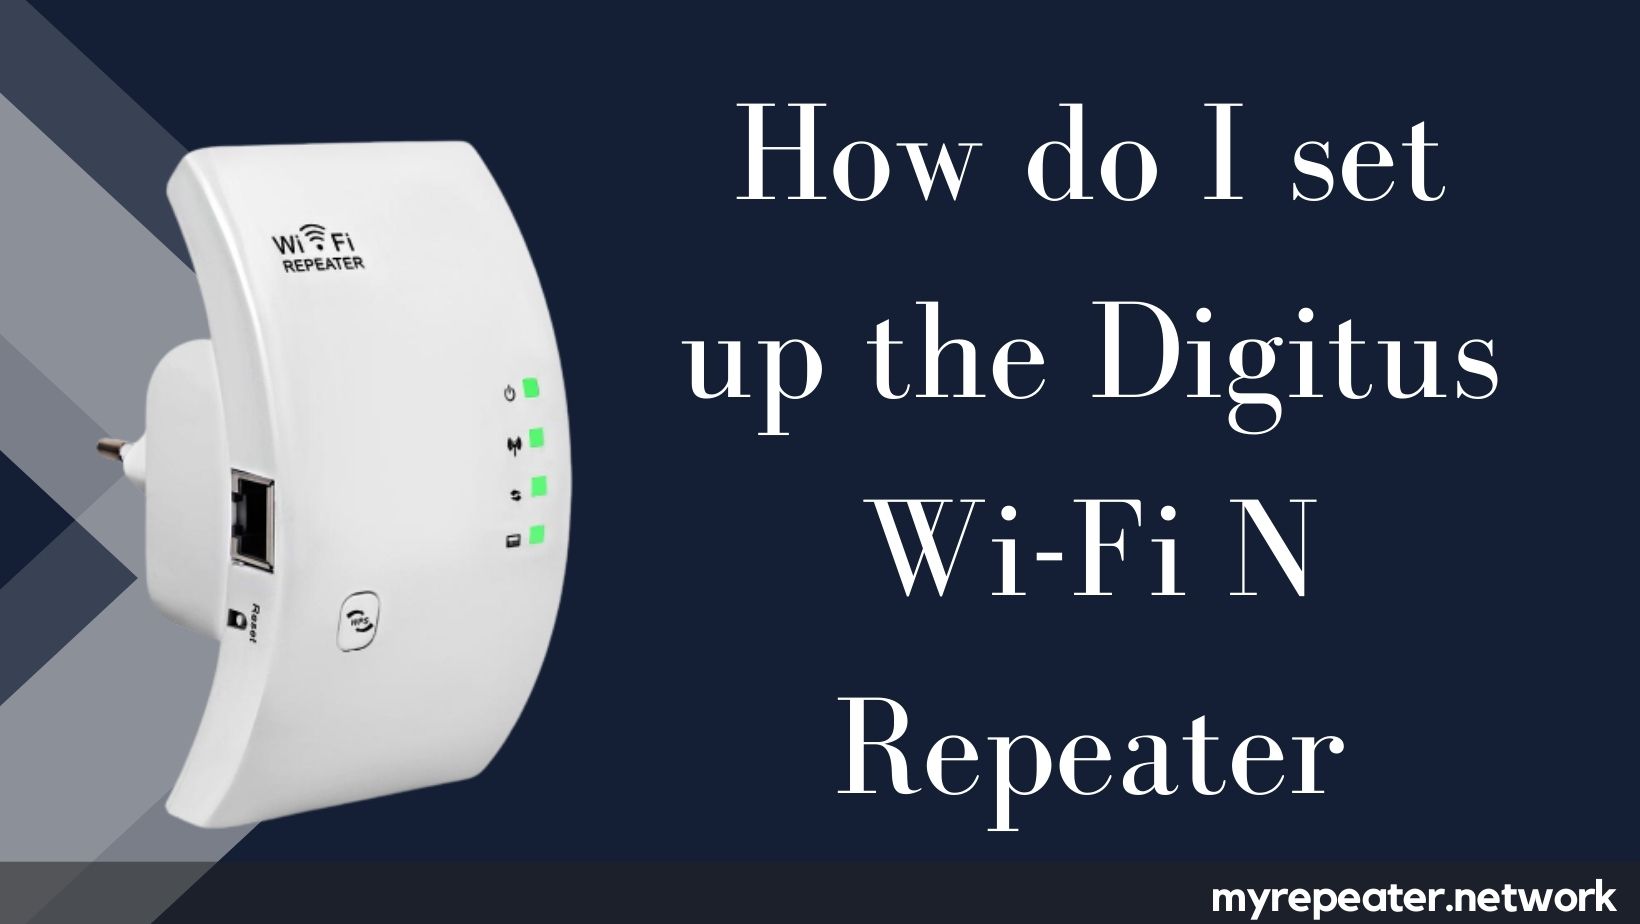 How do I set up the Digitus Wi-Fi N Repeater